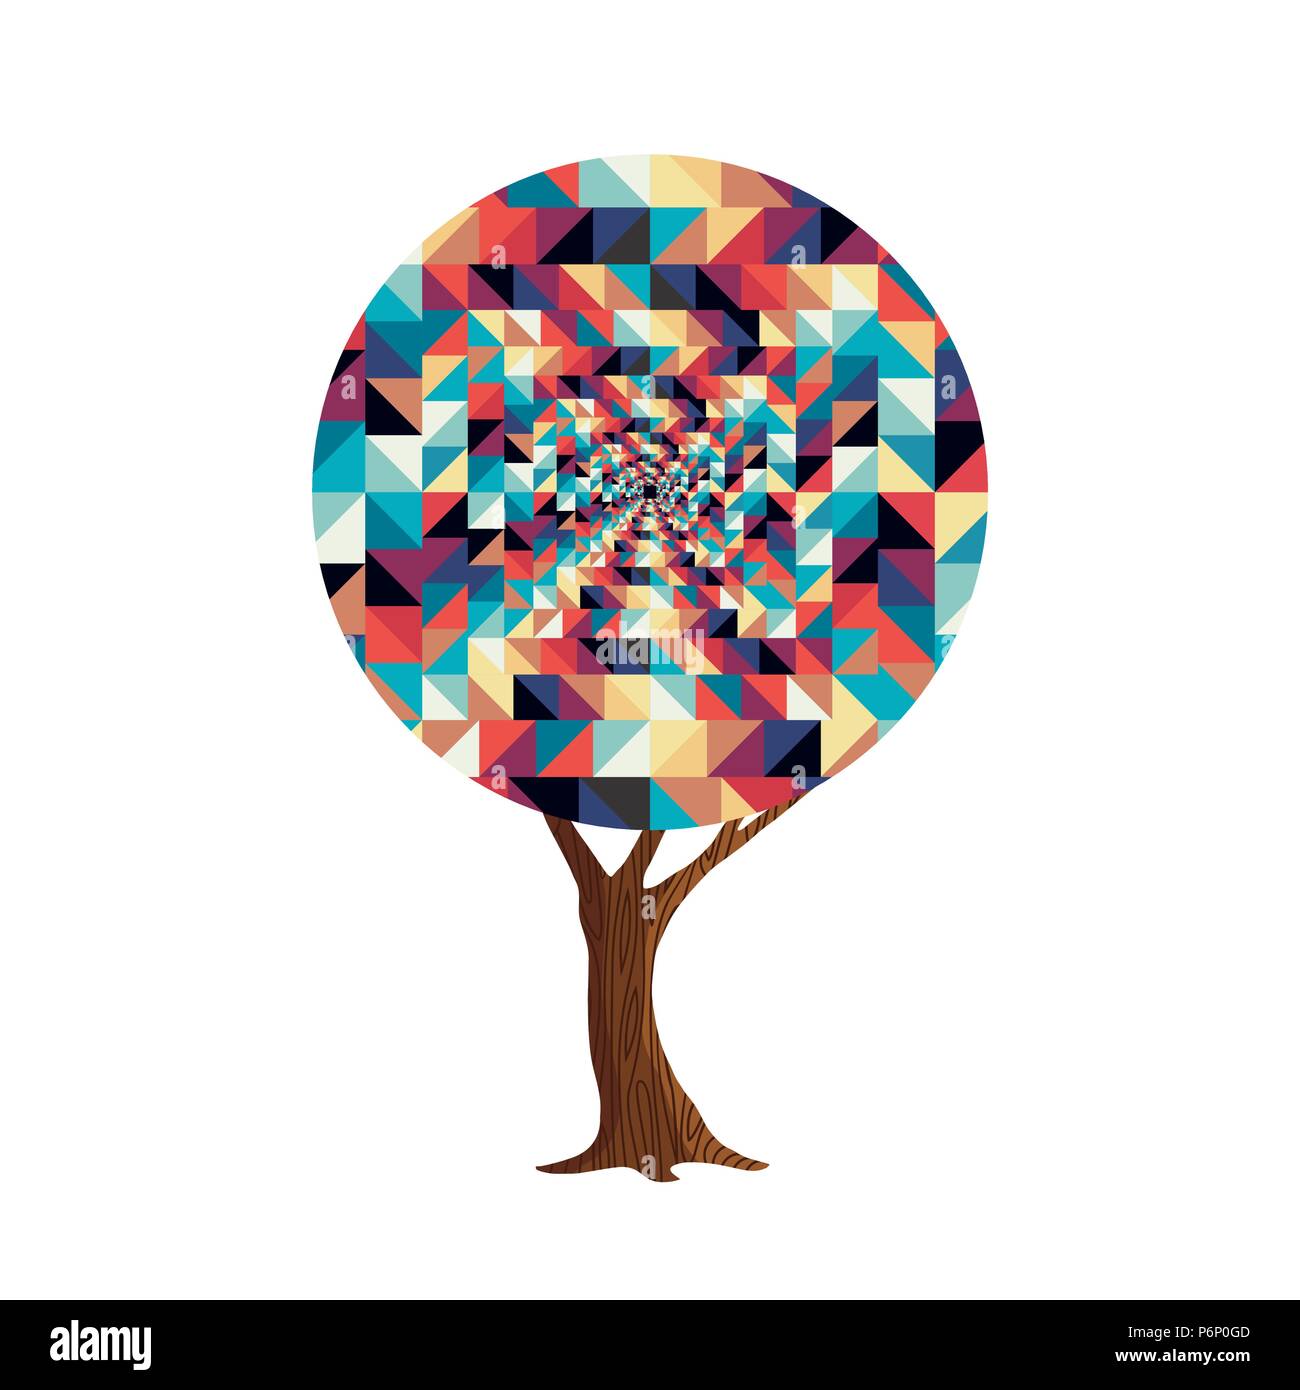 Tree made of colorful abstract shapes. Retro color geometric symbols for fun conceptual idea. EPS10 vector. Stock Vector